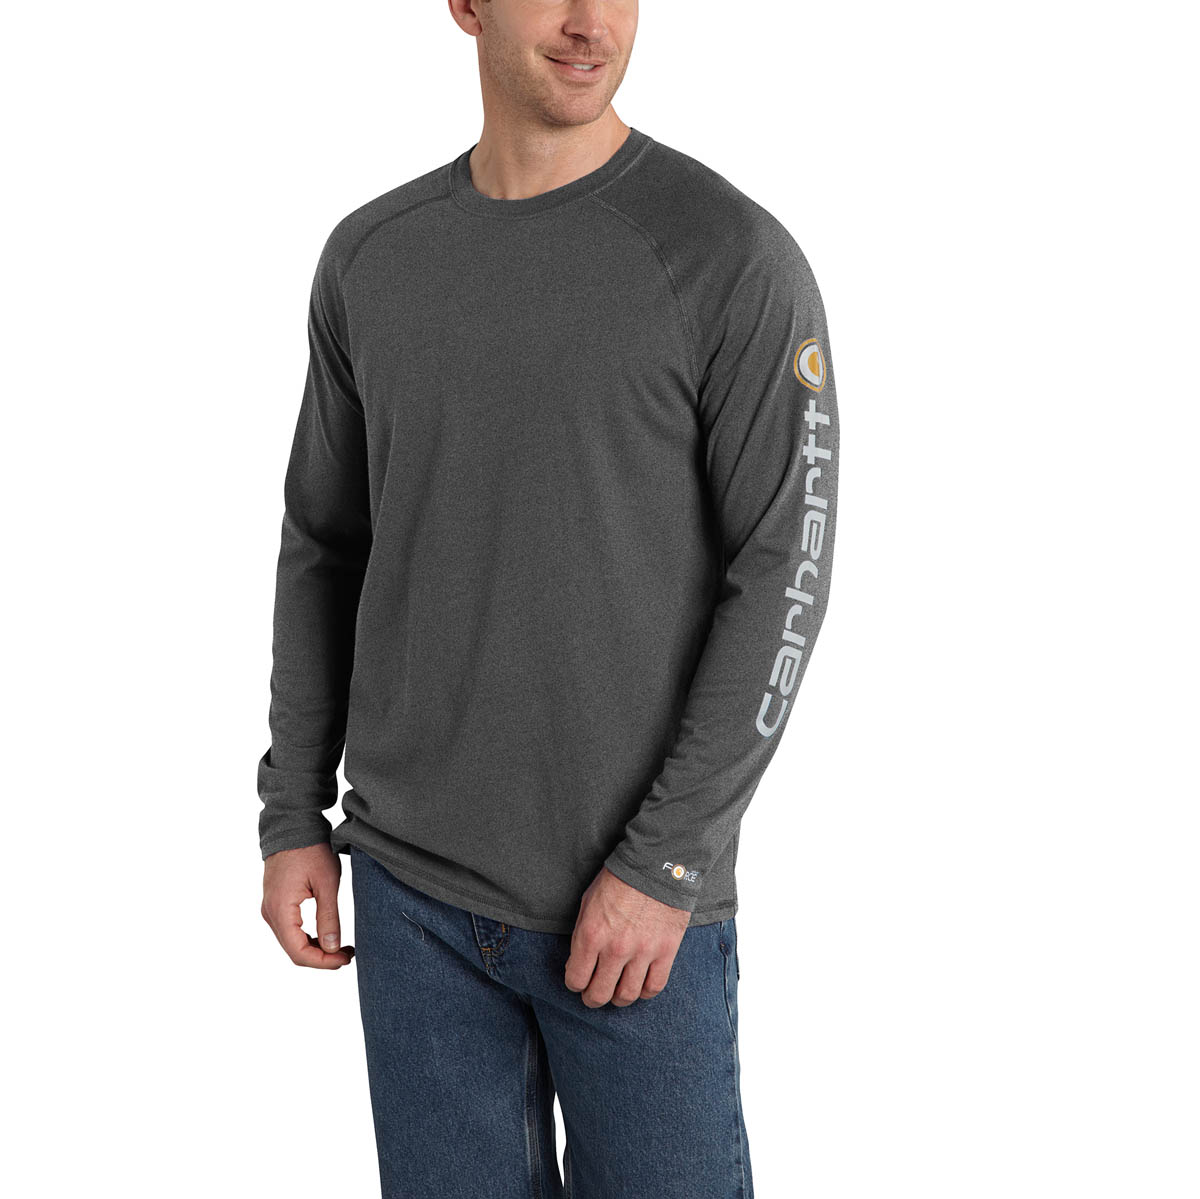 Carhartt Mens Force Cotton Delmont Sleeve Graphic T Shirt